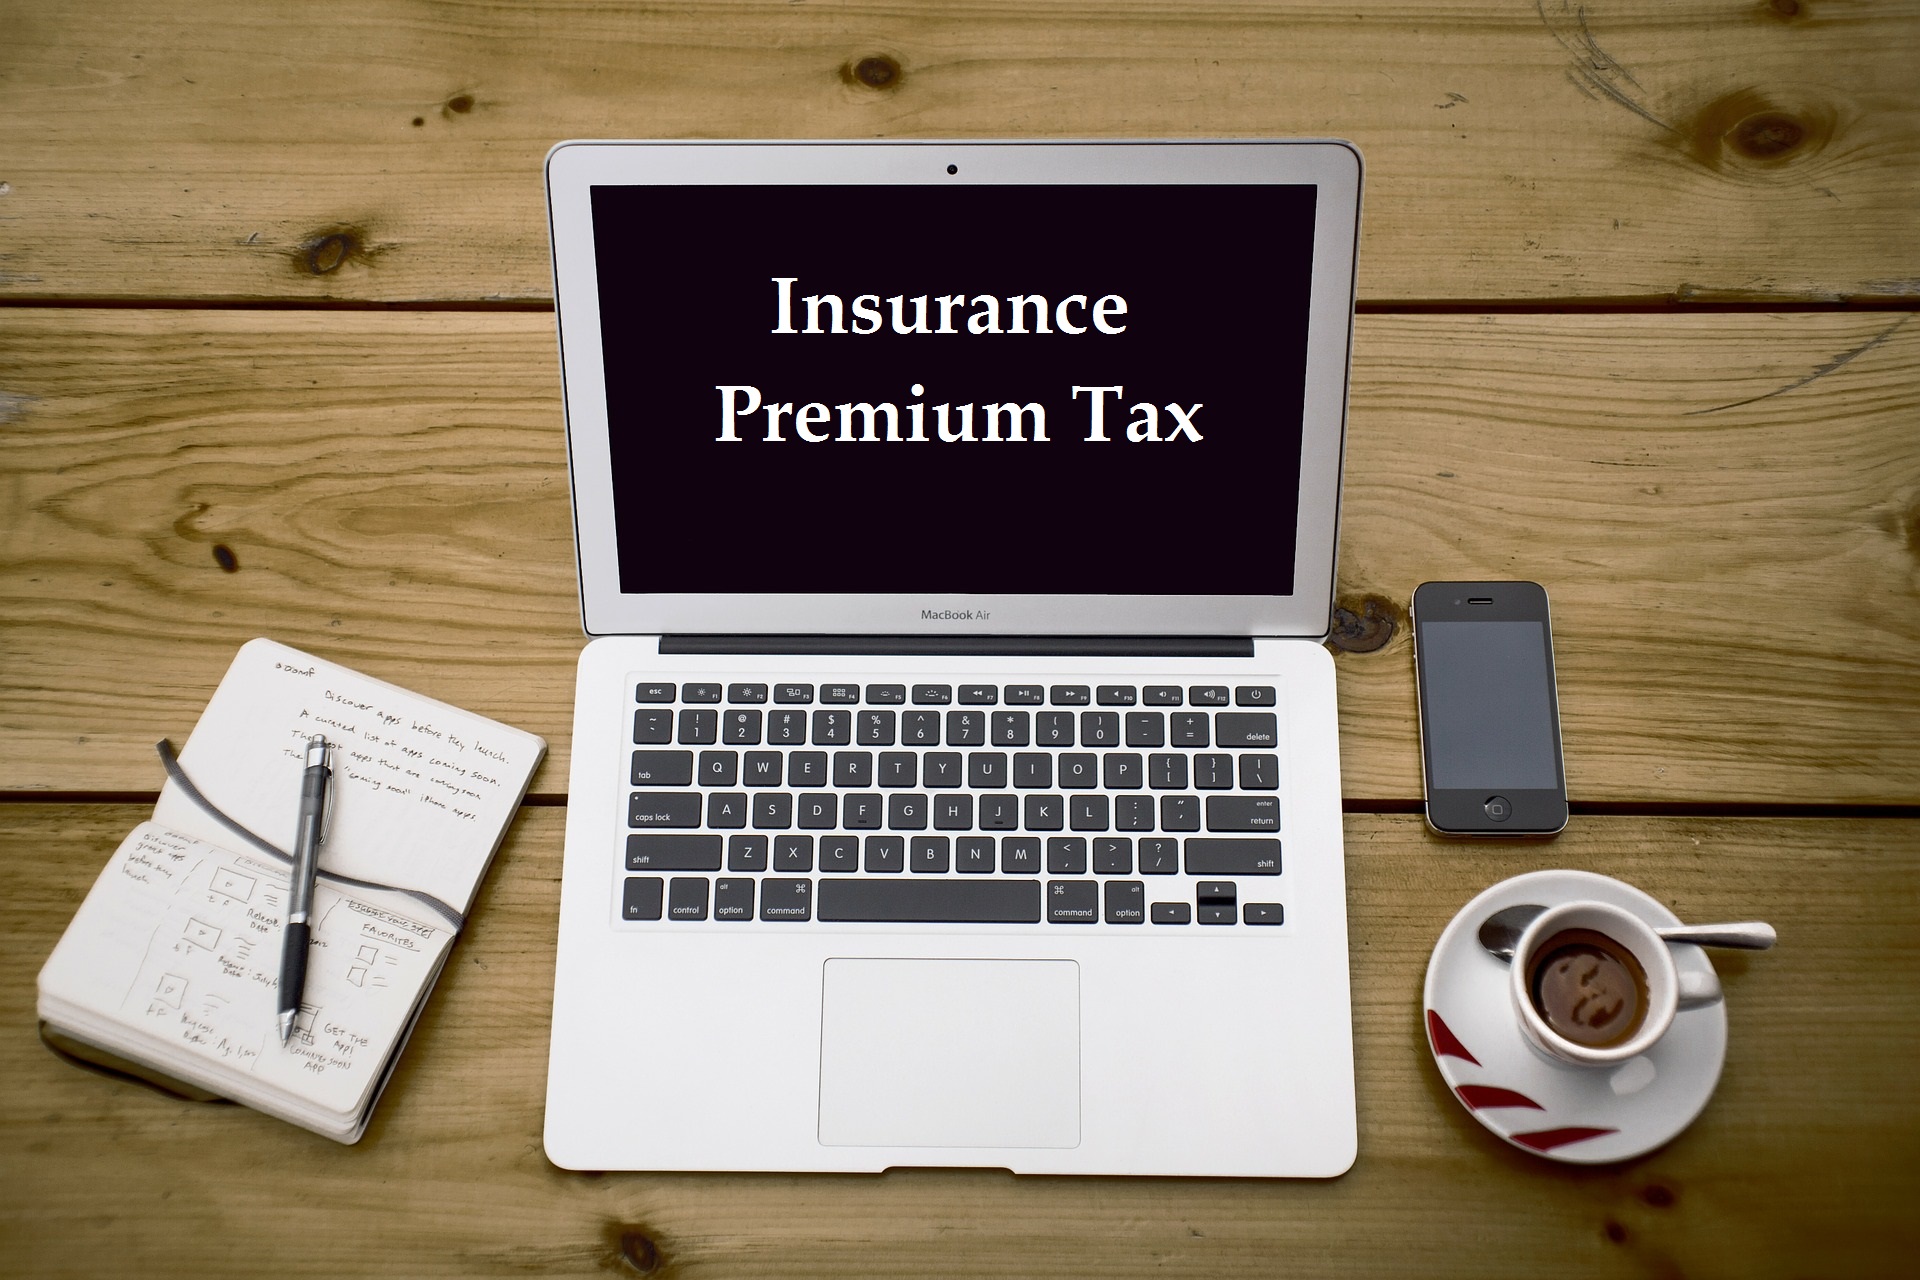 increase-in-insurance-premium-tax-from-june-2017-blog-realmprotection